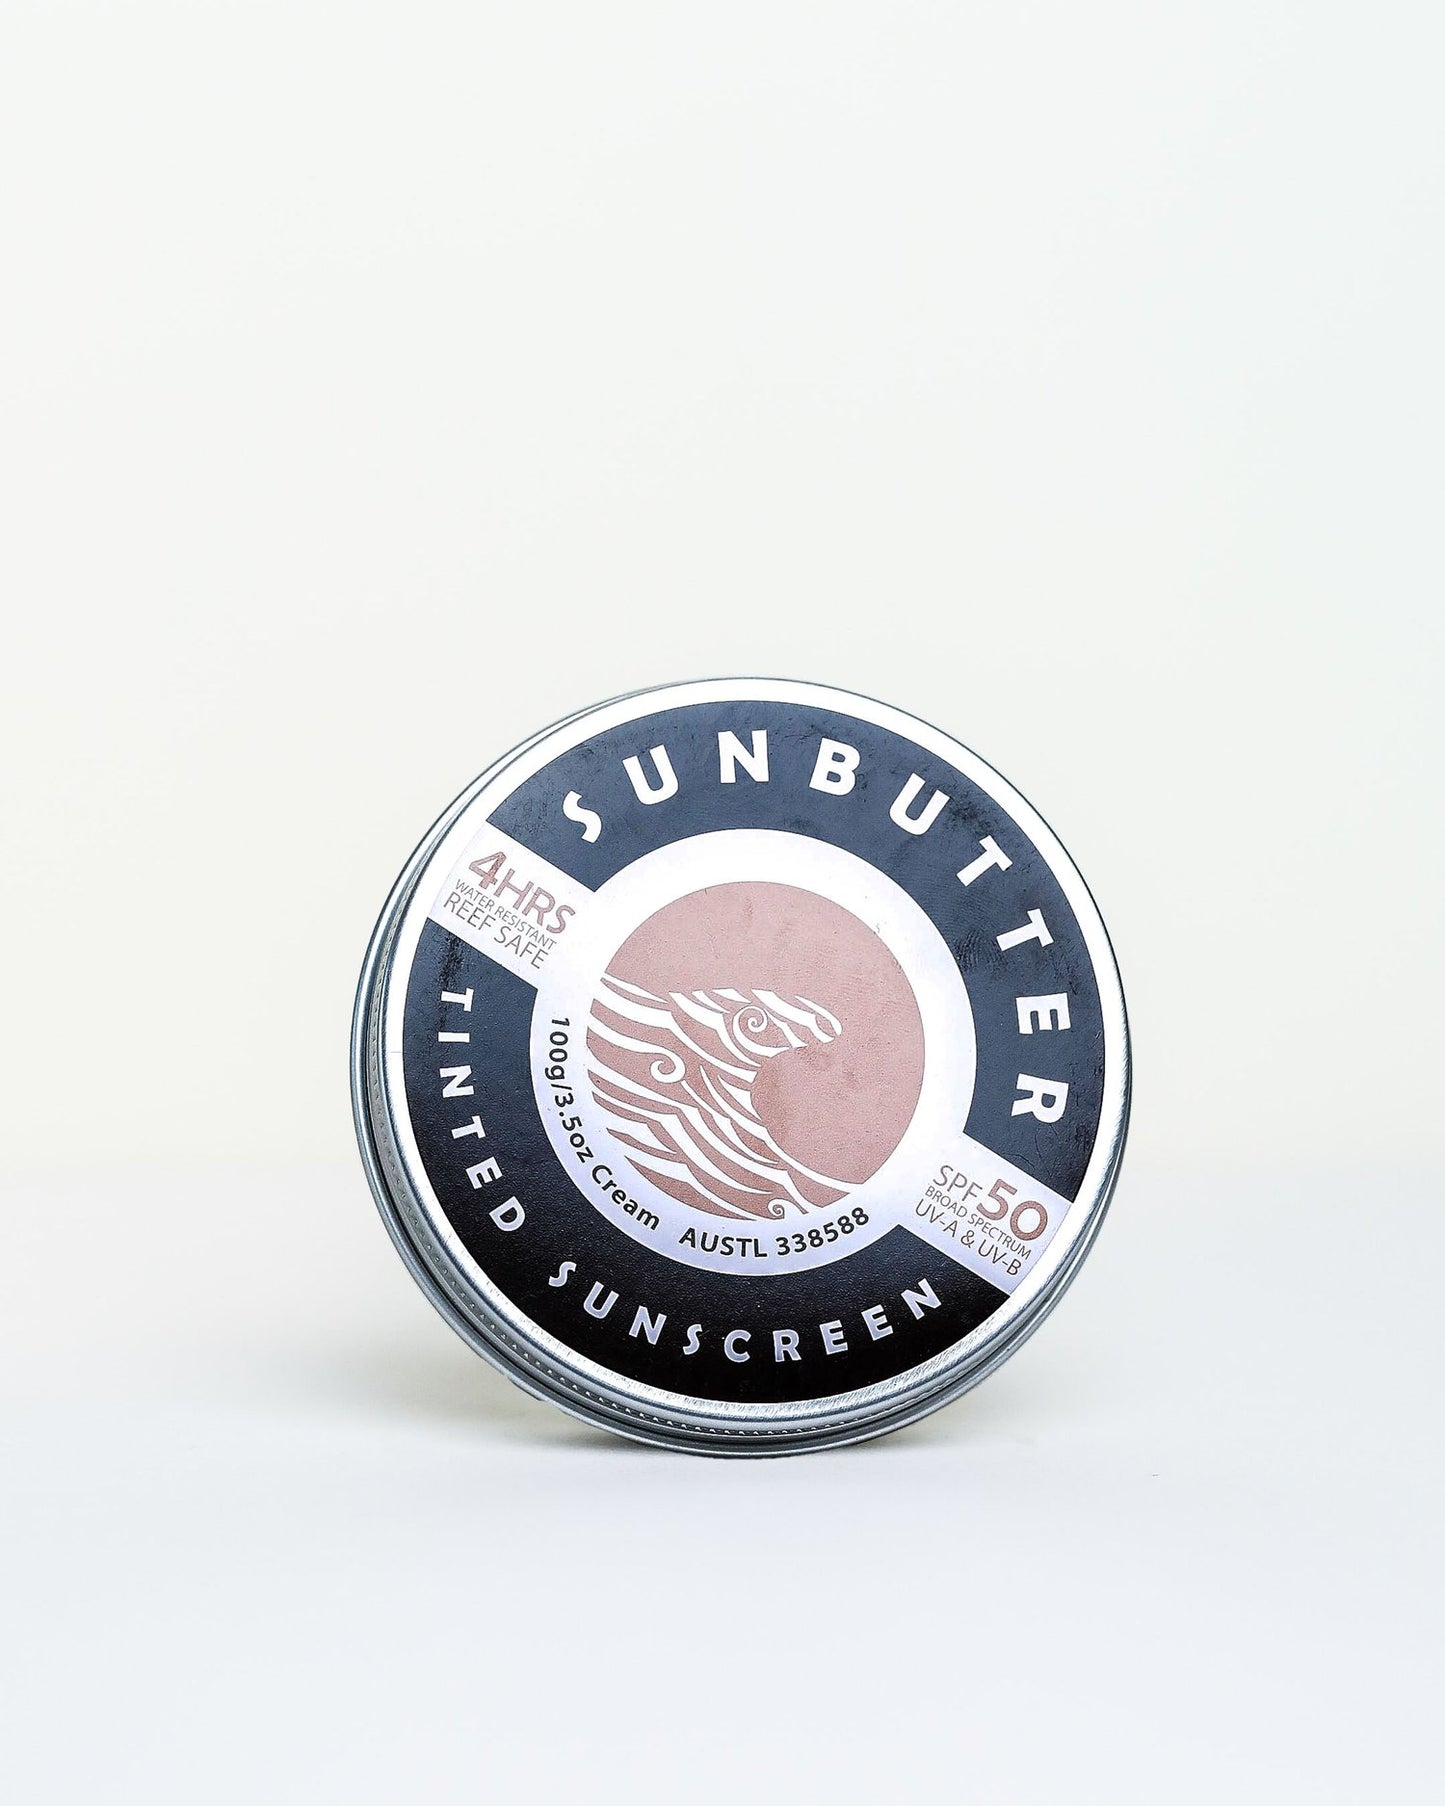 SunButter TINTED SPF50 Water Resistant and Reef Safe Sunscreen